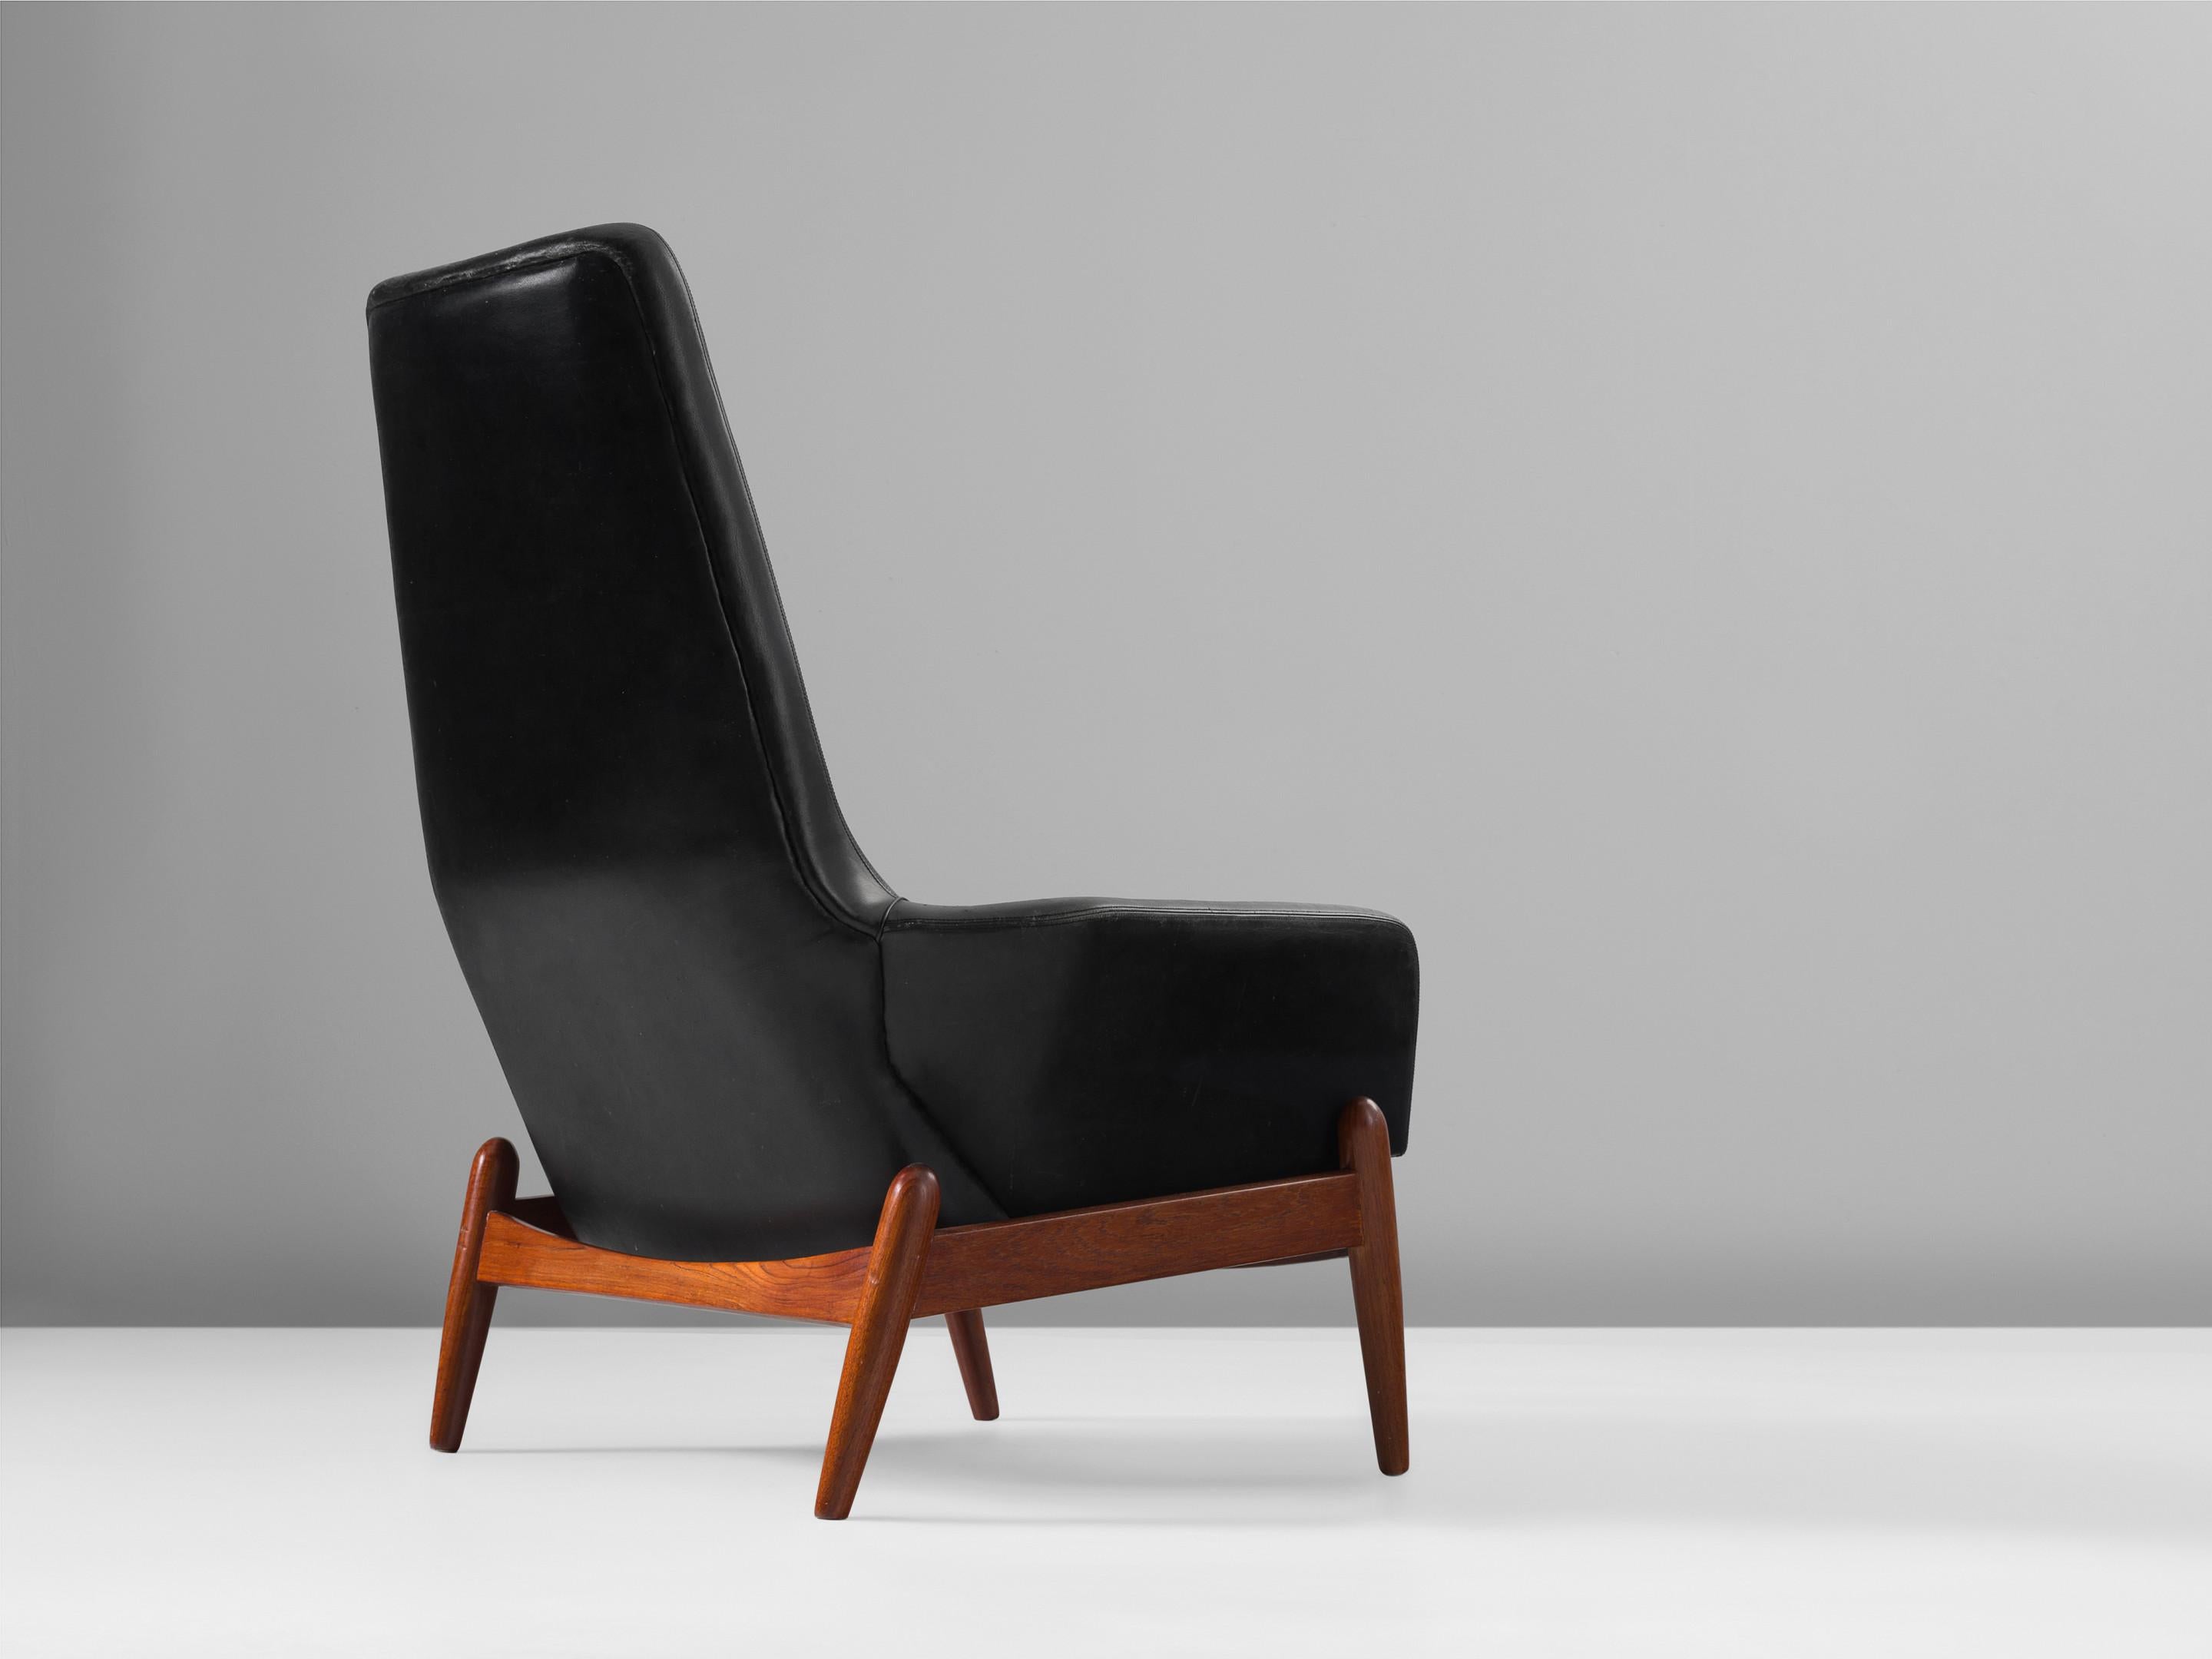 Ib Kofod-Larsen, lounge chair model 'PD30', black leather, teak, Denmark, 1960s.

The designer of this chair, Ib Kofod-Larsen (1921-2003) is known for his distinctive designs features and comfortable materials and simplistic lines, with circular